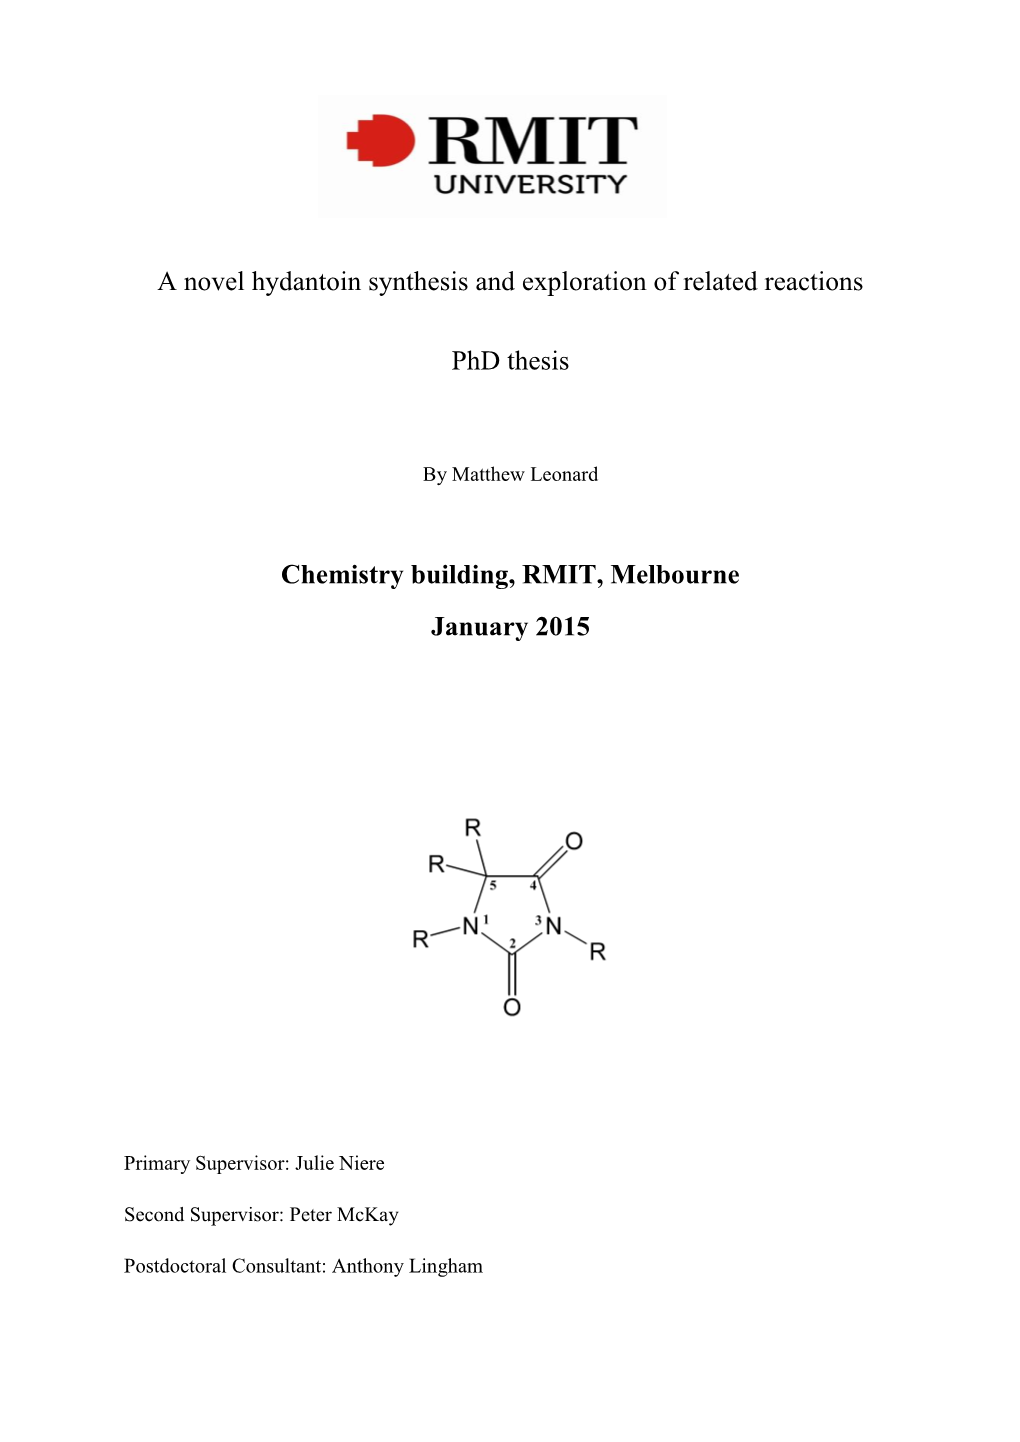 A Novel Hydantoin Synthesis and Exploration of Related Reactions